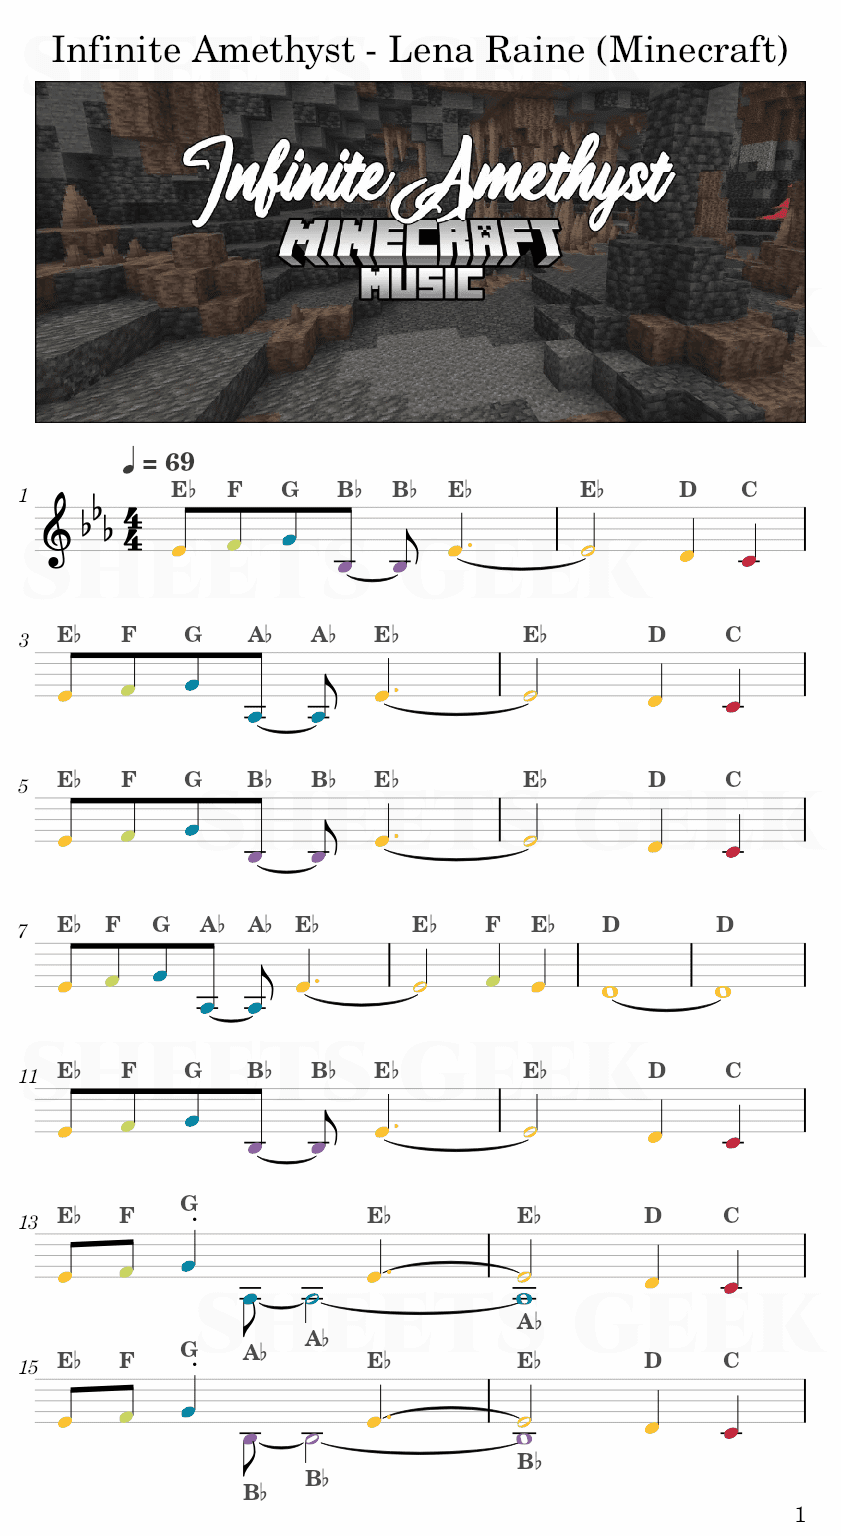 Infinite Amethyst - Lena Raine (Minecraft 1.18 Caves & Cliffs) Easy Sheet Music Free for piano, keyboard, flute, violin, sax, cello page 1